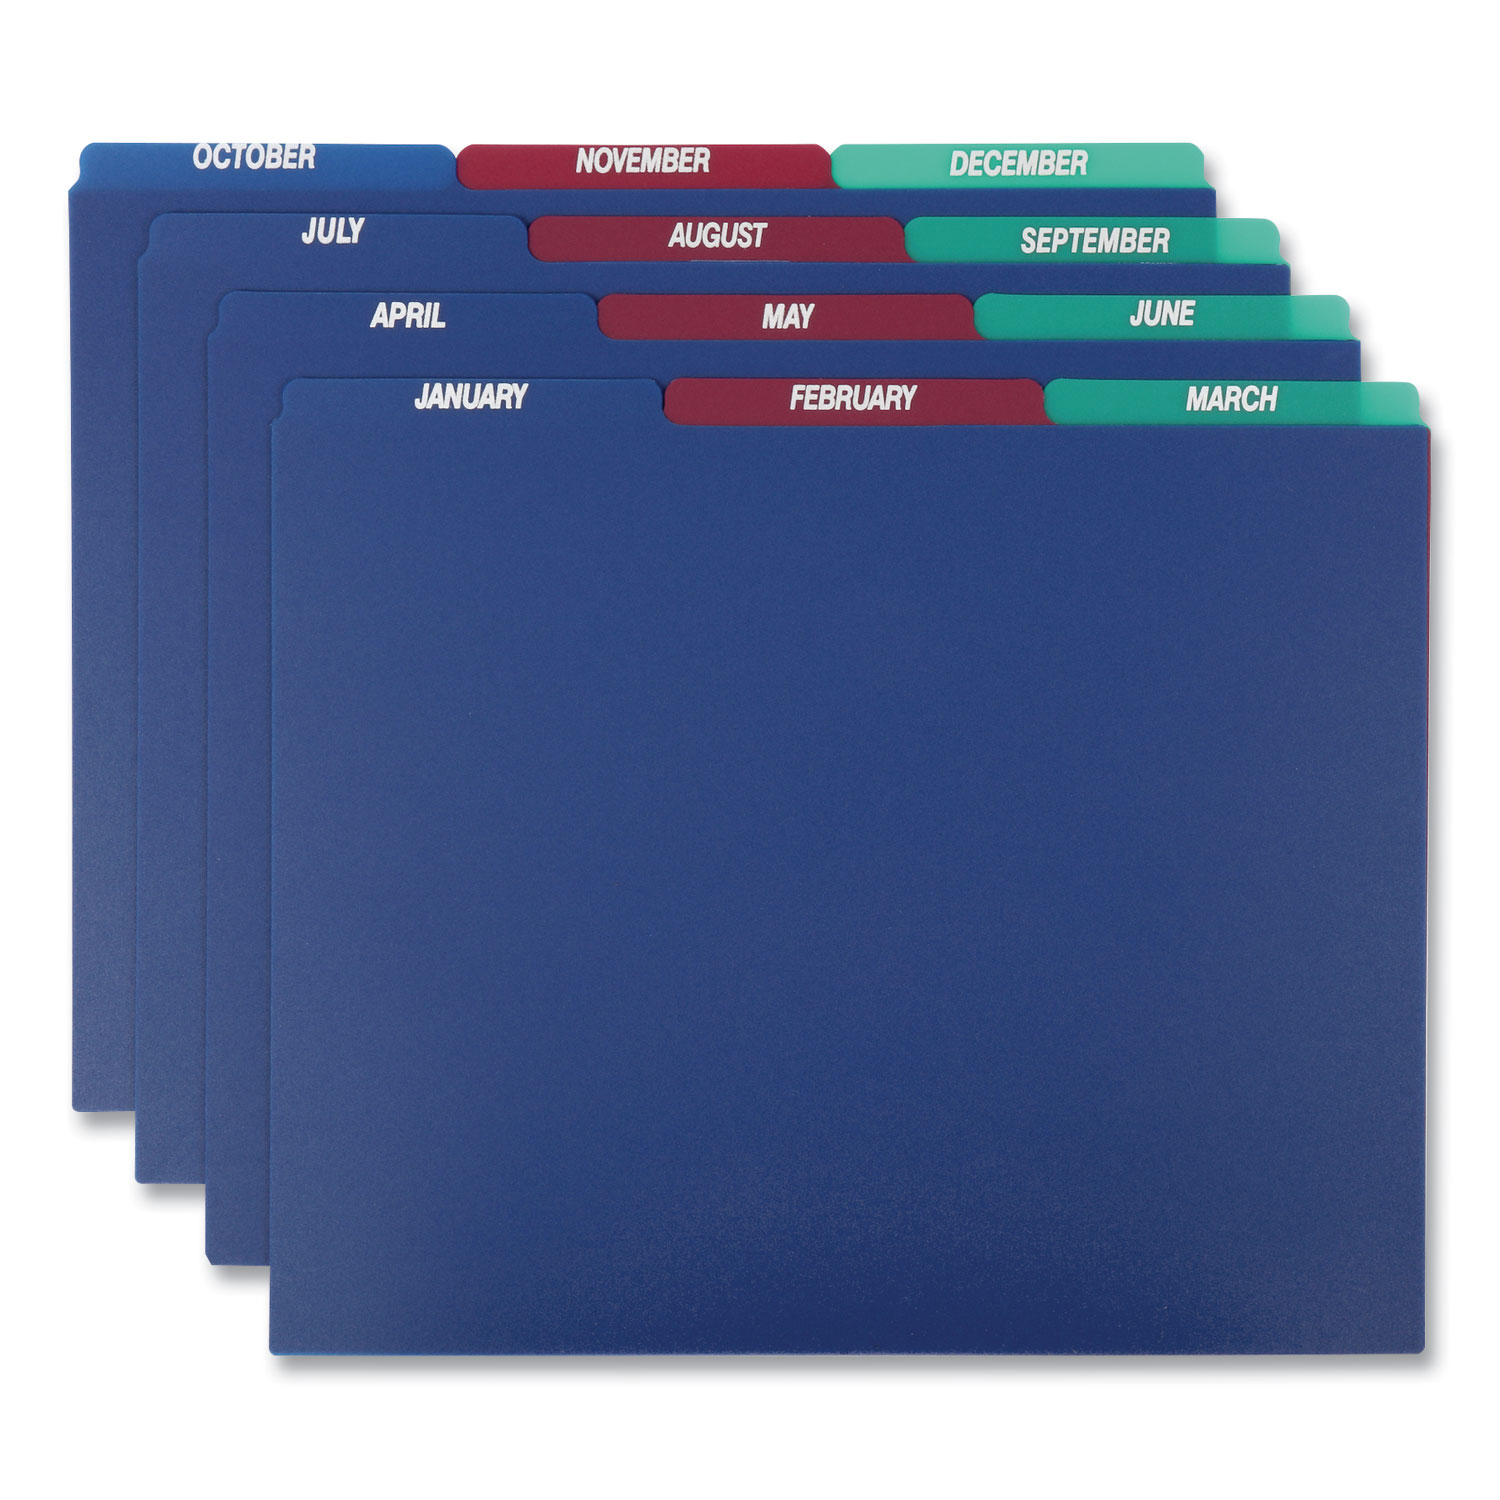  Pendaflex 40144 Poly Top Tab File Guides, 1/3-Cut Top Tab, January to December, 8.5 x 11, Assorted Colors, 12/Set (PFX40144) 